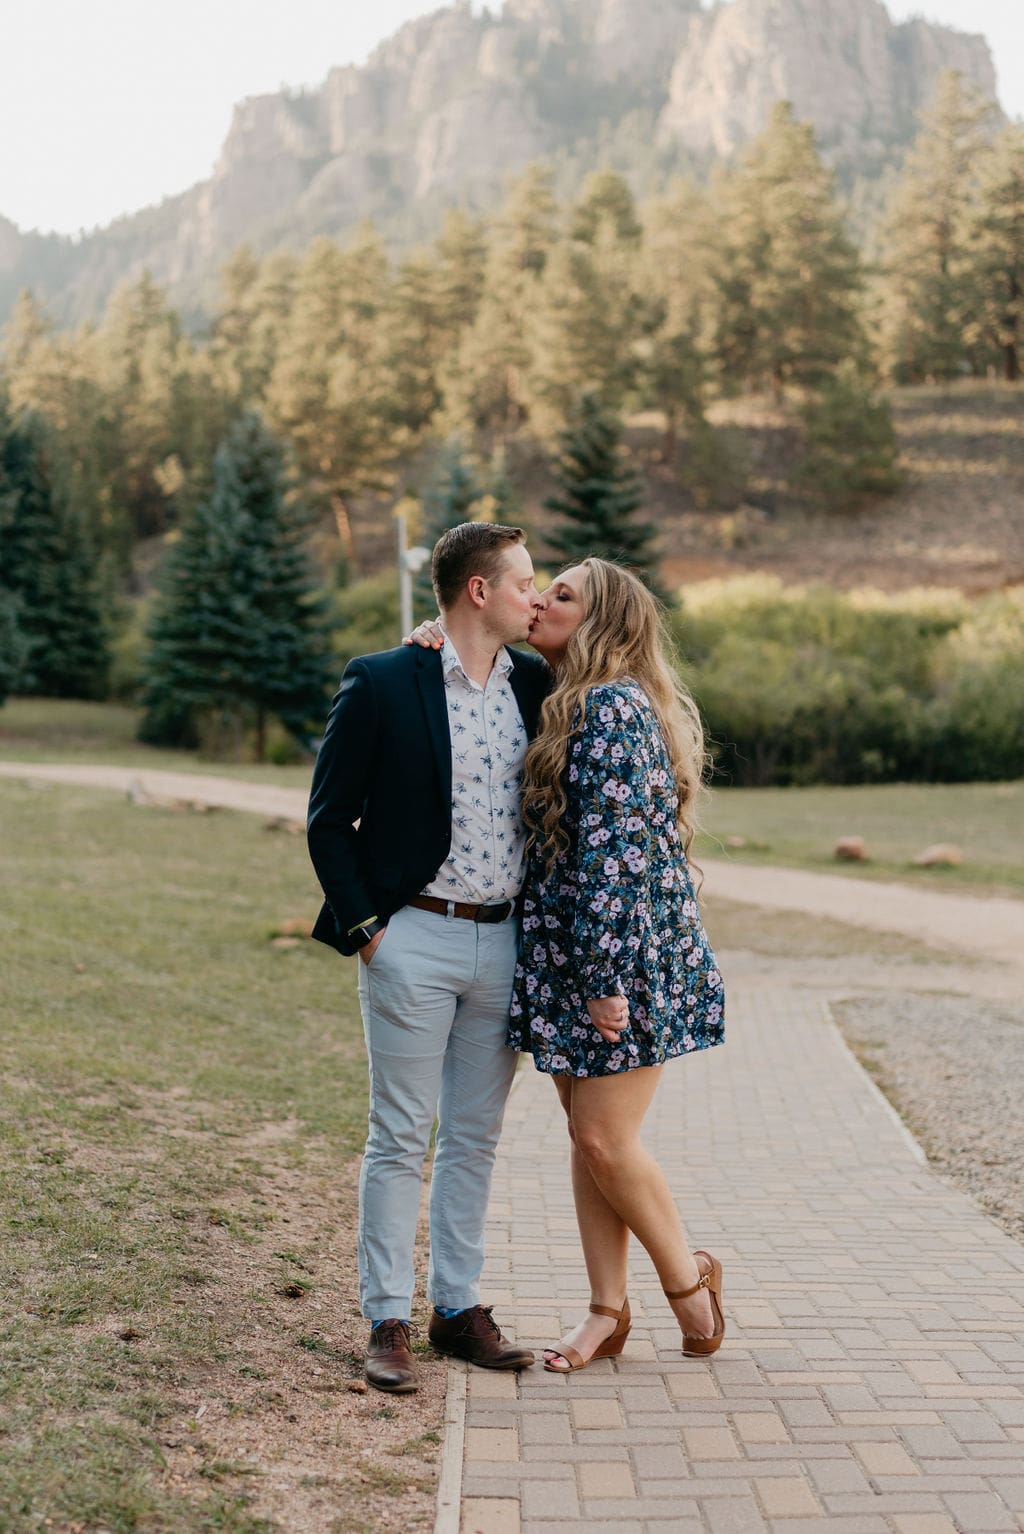 Wedding guests kiss in front of mountain at wedding